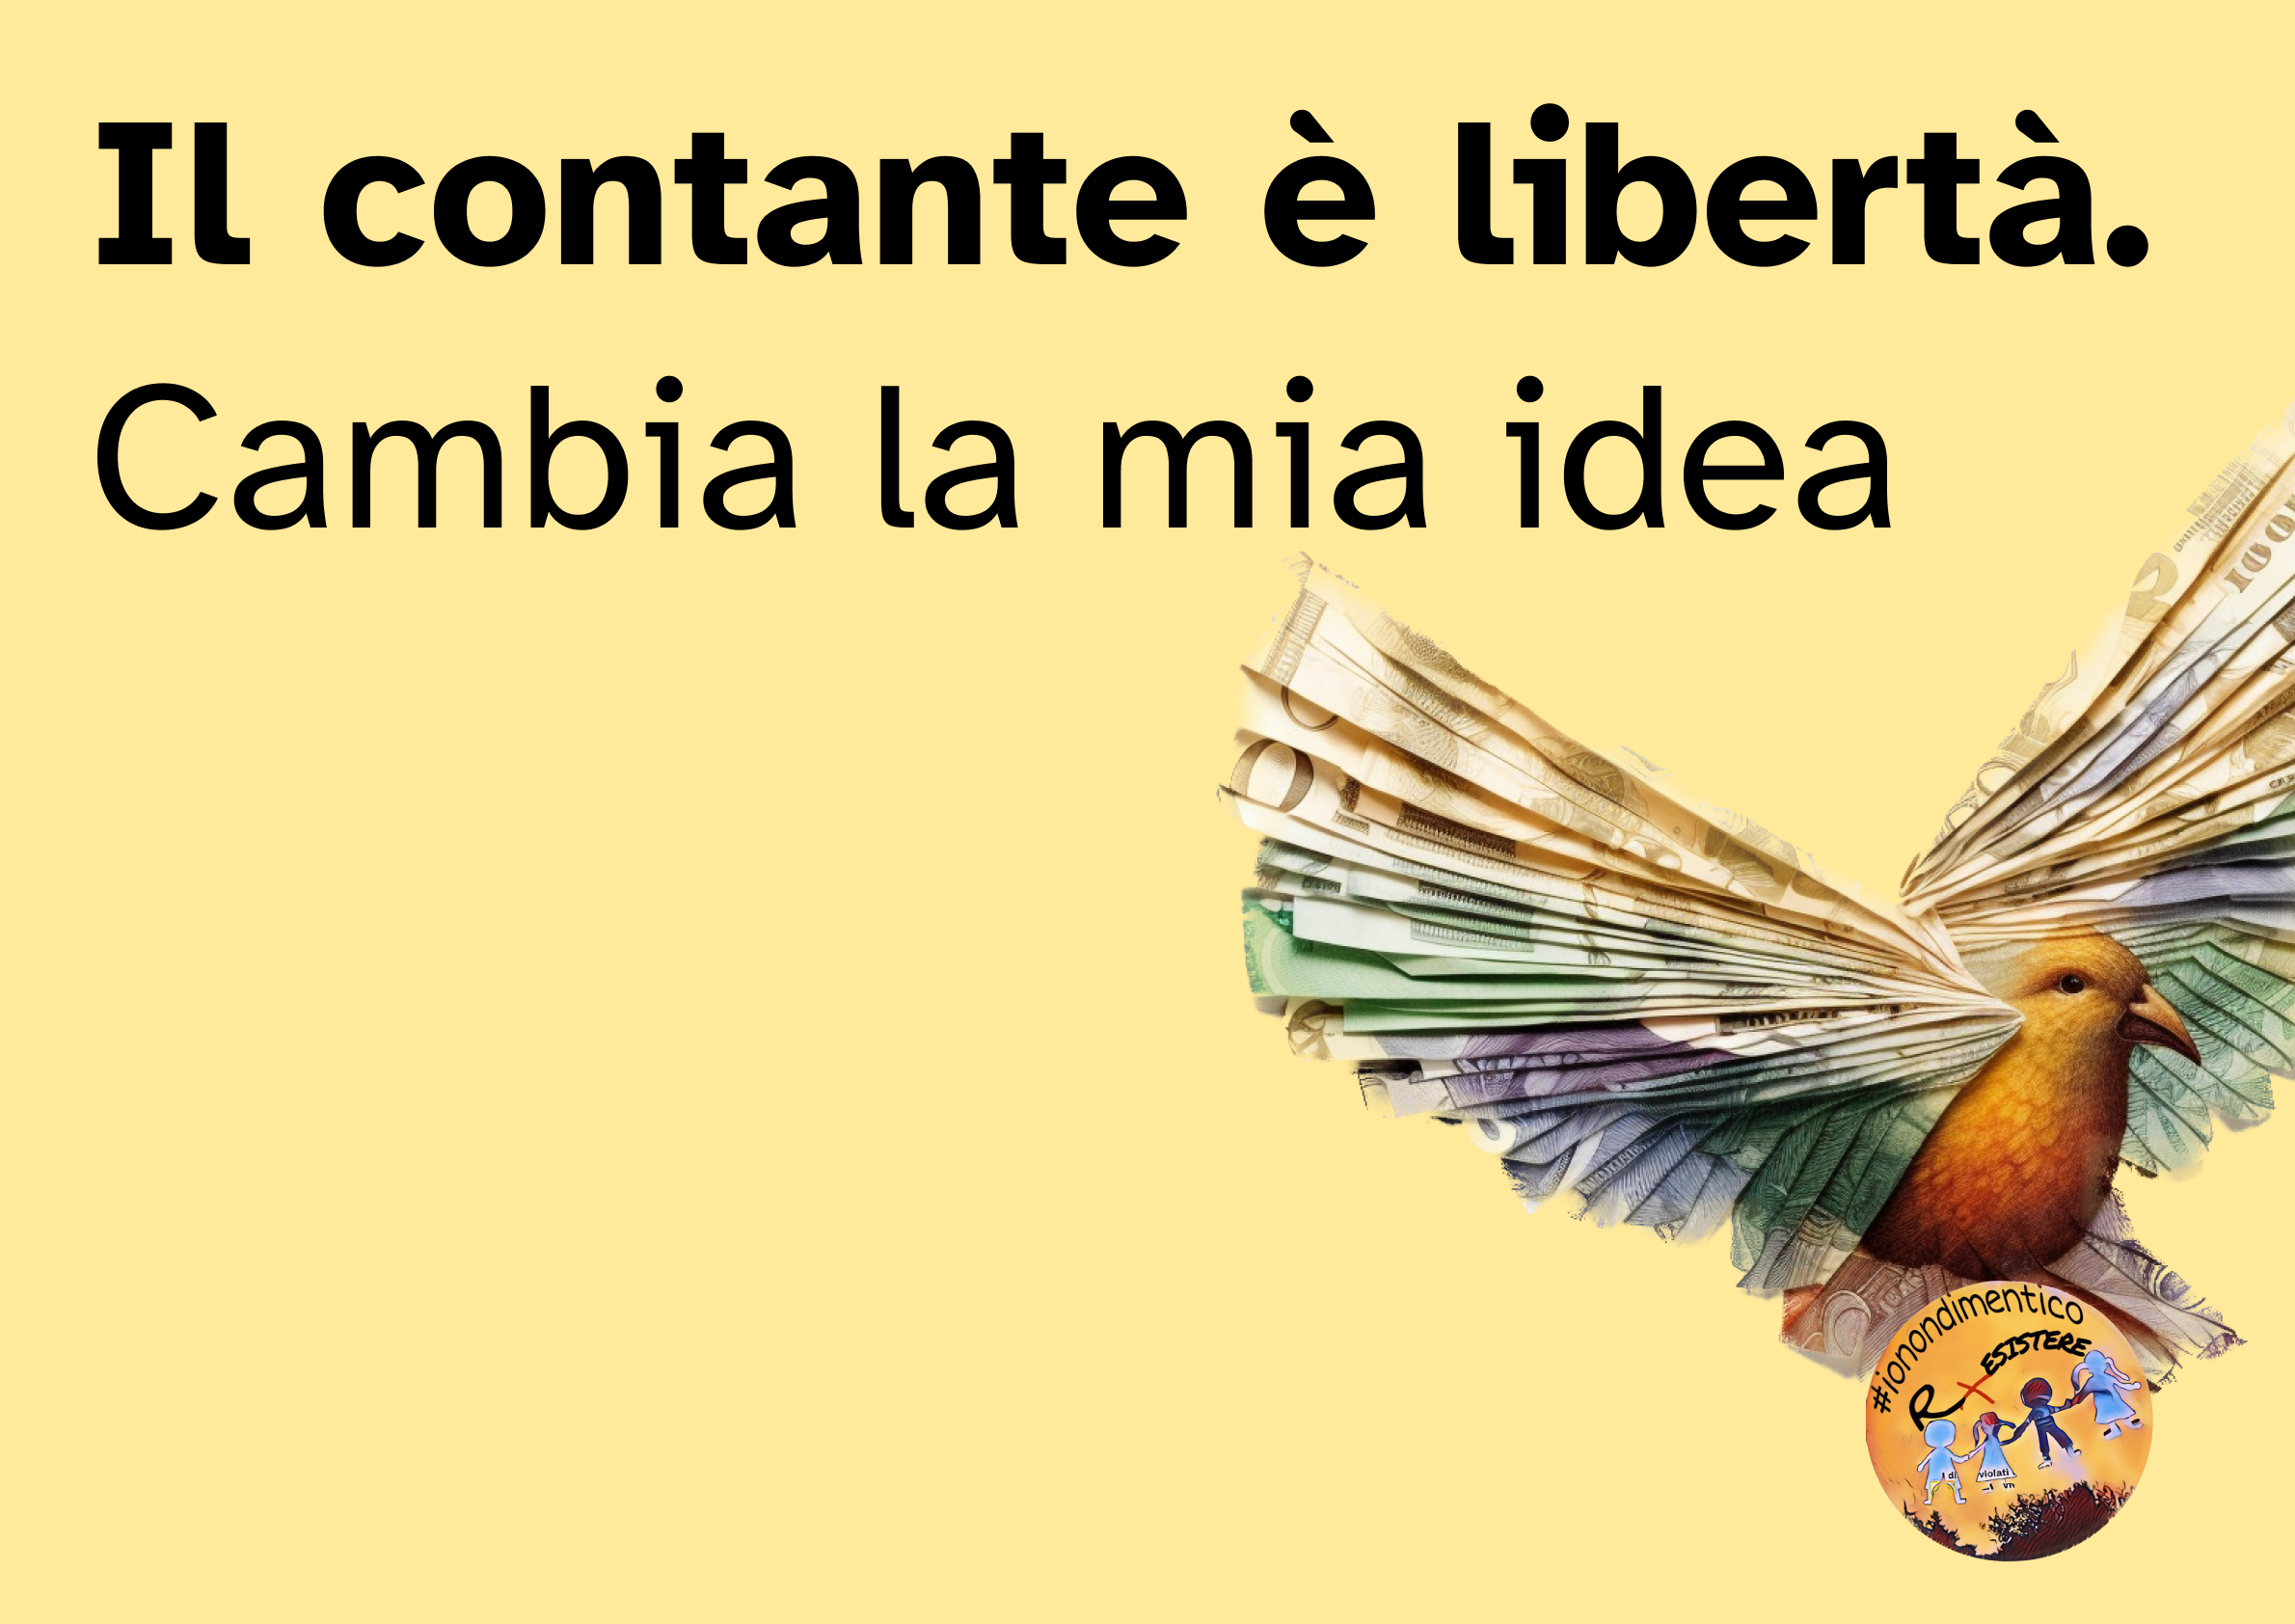 “Cash is freedom” poster in Italian